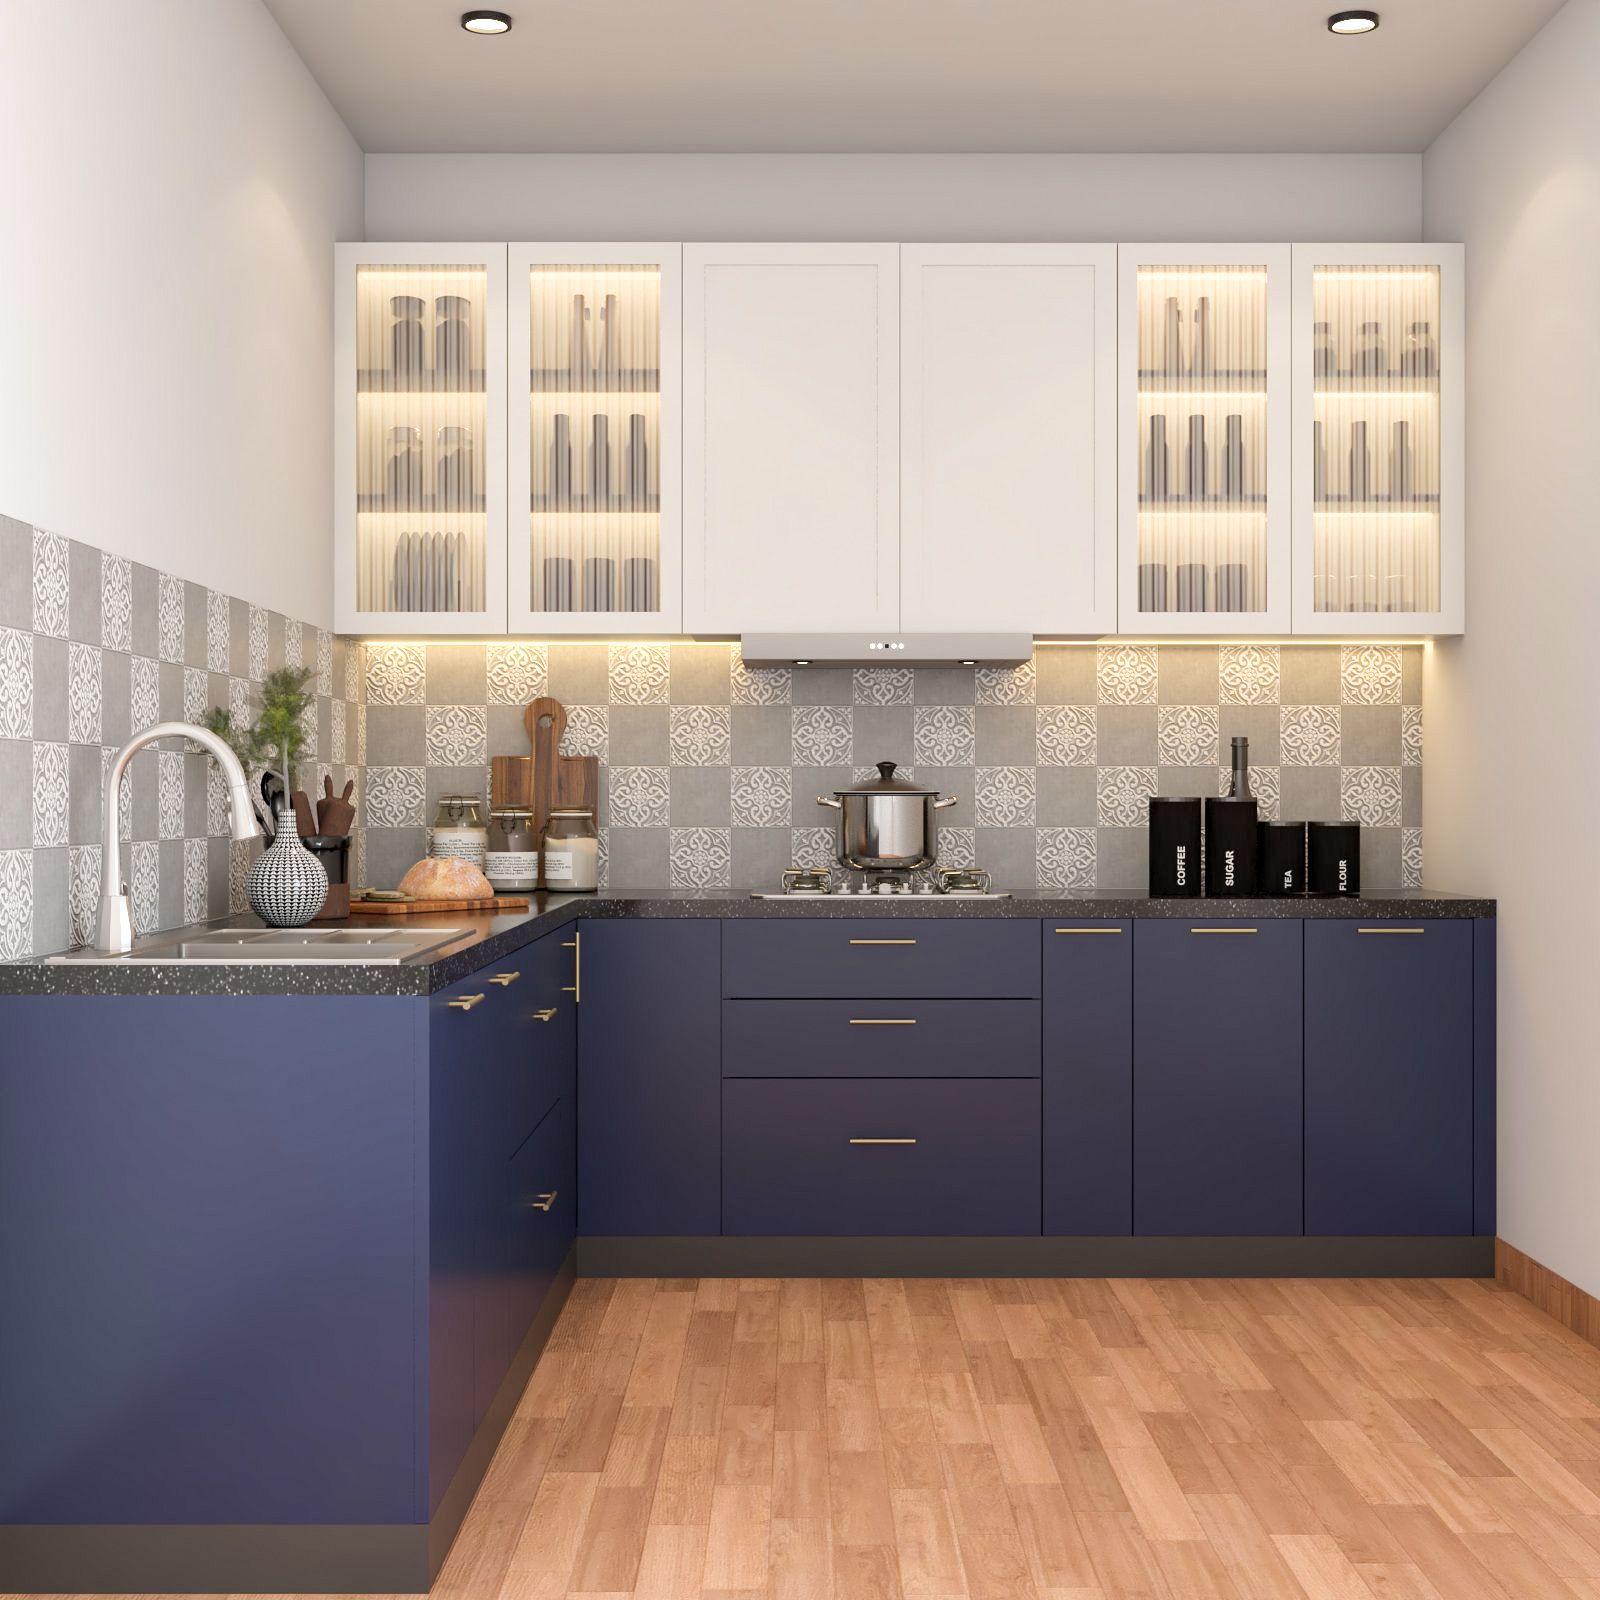 Contemporary Blue And White L-Shaped Kitchen Design With Grey And White Moroccan Kitchen Backsplash